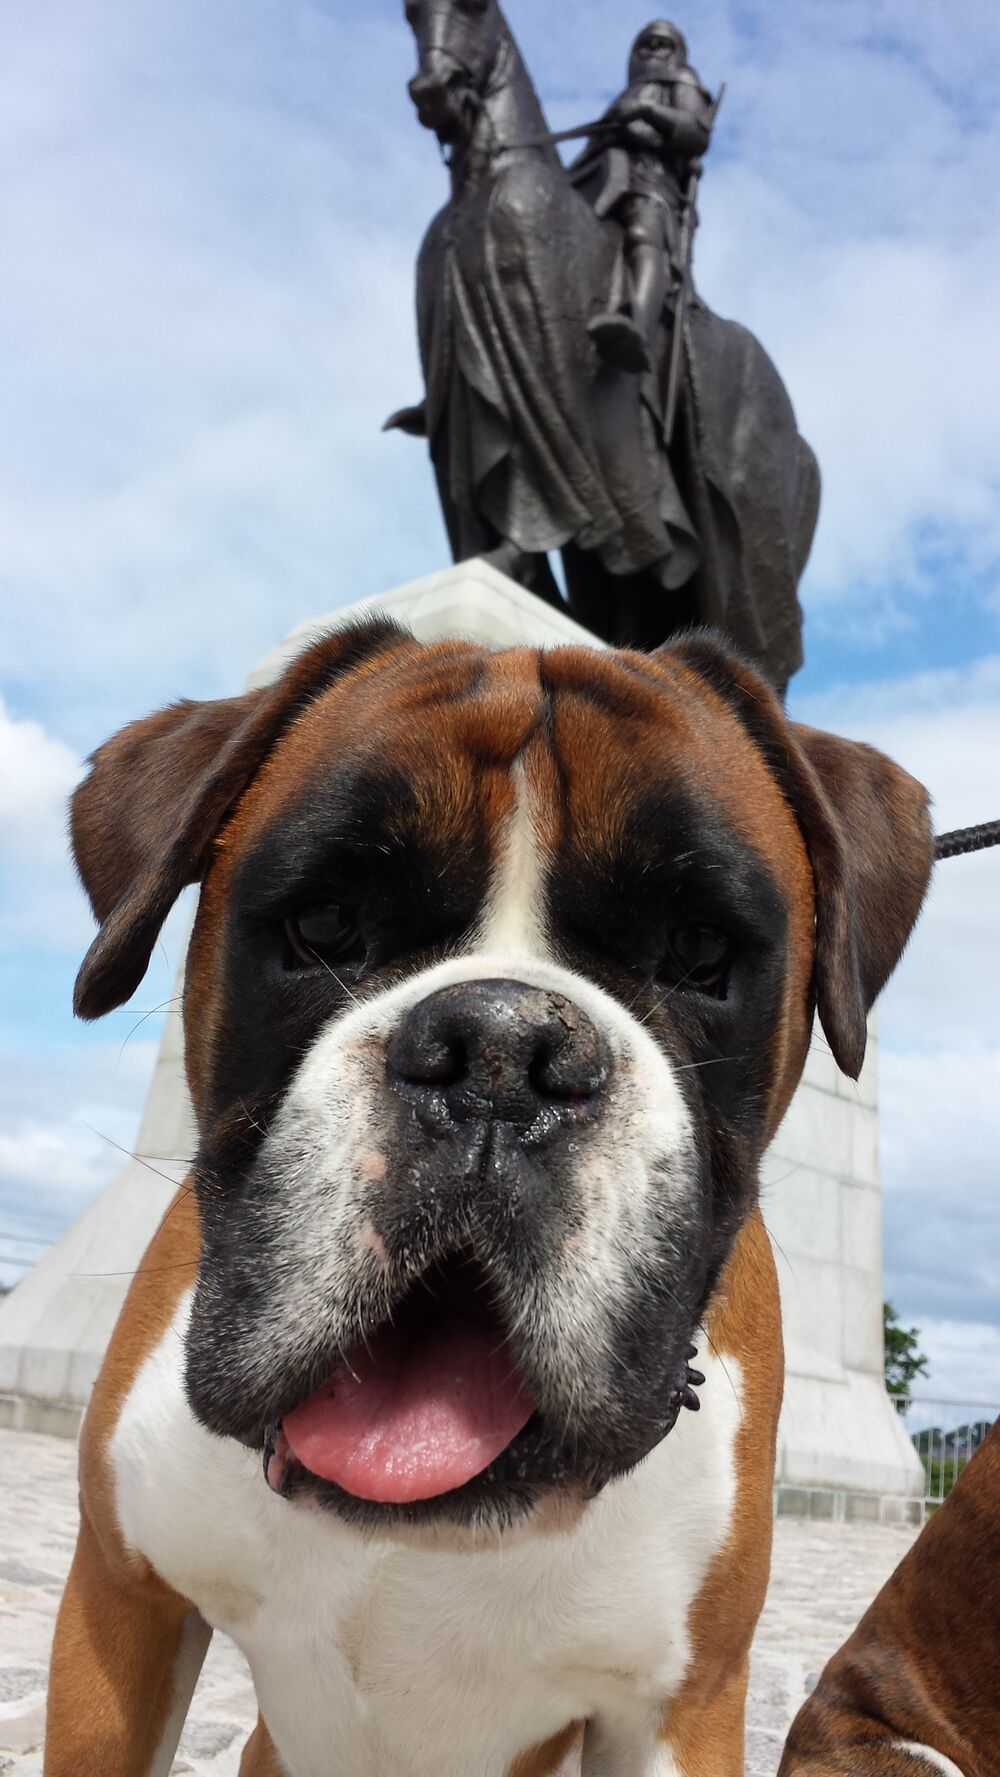 A close-up of the head and chest of a boxer, with the statue of Robert the Bruce on a horse looming behind him. It’s a sunny day.